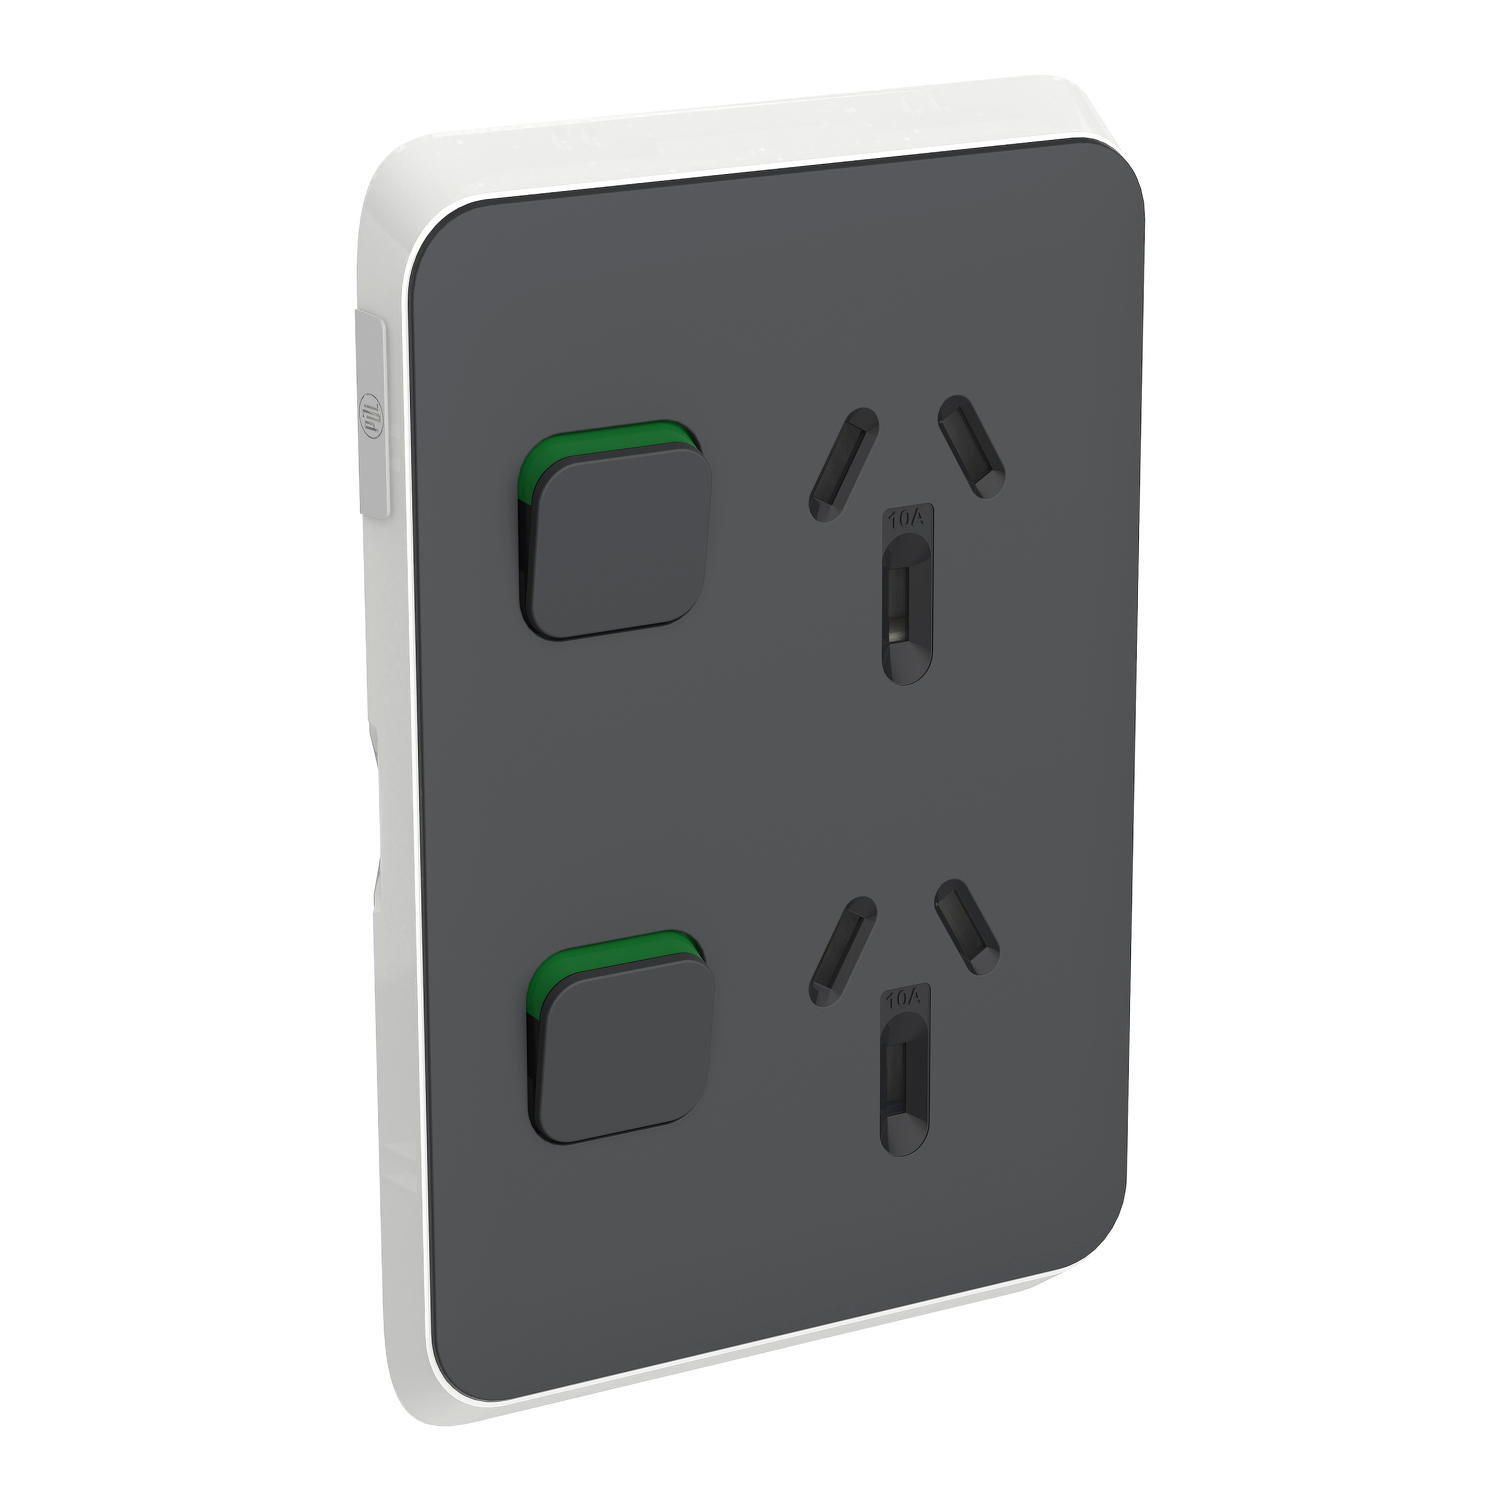 PDL Iconic - Cover Plate Double Switched Socket 10A Vertical - Anthracite